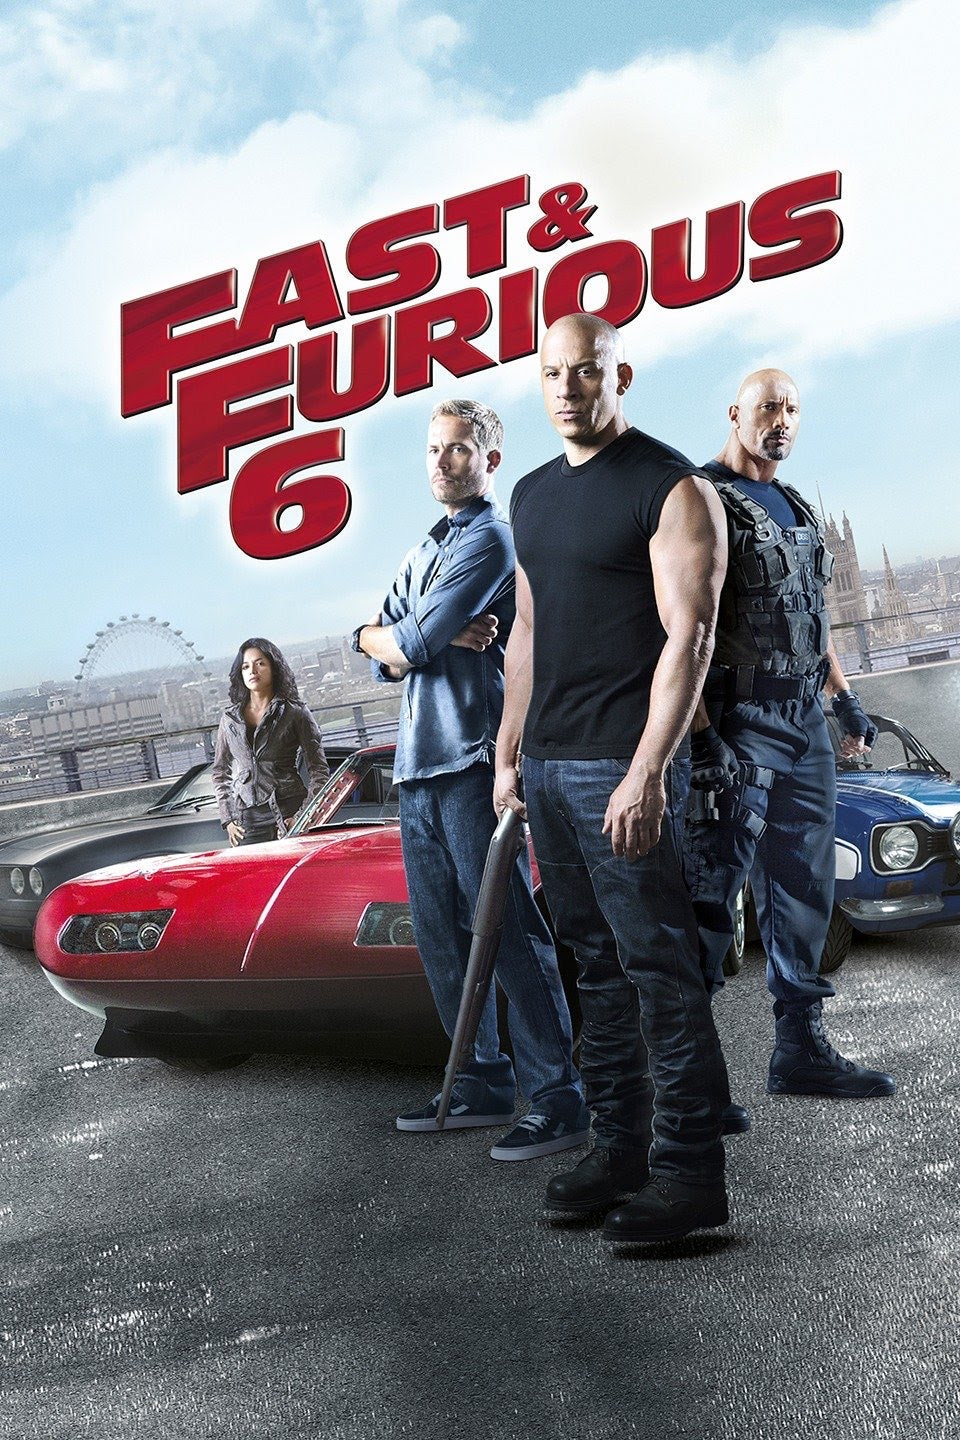 Fast & Furious 6 [Extended Edition] (2013) Vudu or Movies Anywhere HD redemption only